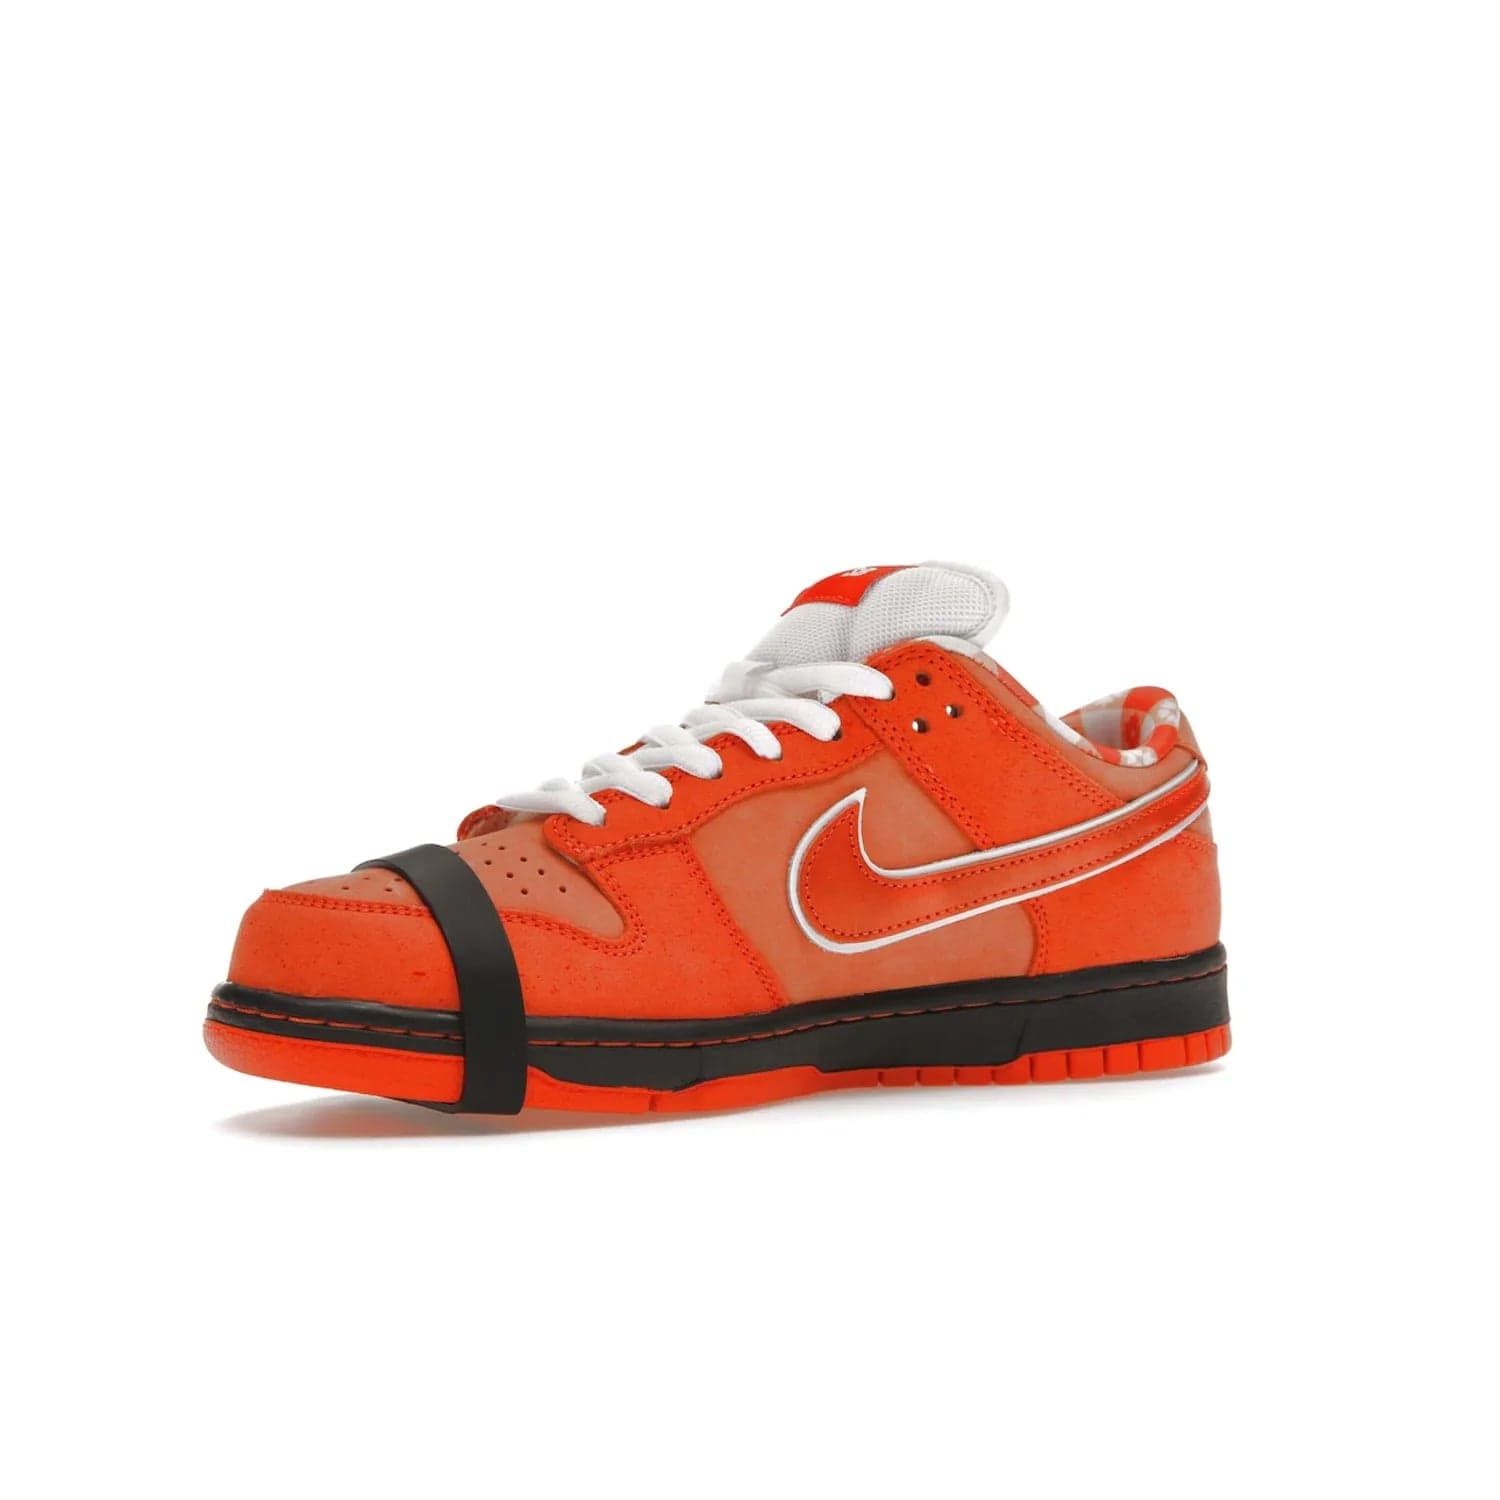 Nike SB Dunk Low Concepts Orange Lobster - Image 16 - Only at www.BallersClubKickz.com - Limited Nike SB Dunk Low Concepts Orange Lobster features premium nubuck upper with vibrant oranges for eye-catching colorblocked design. Signature Nike SB tag and bib-inspired interior for added texture. Outsole and cupsole provide extra reinforcement. Get it 12/20/2022.